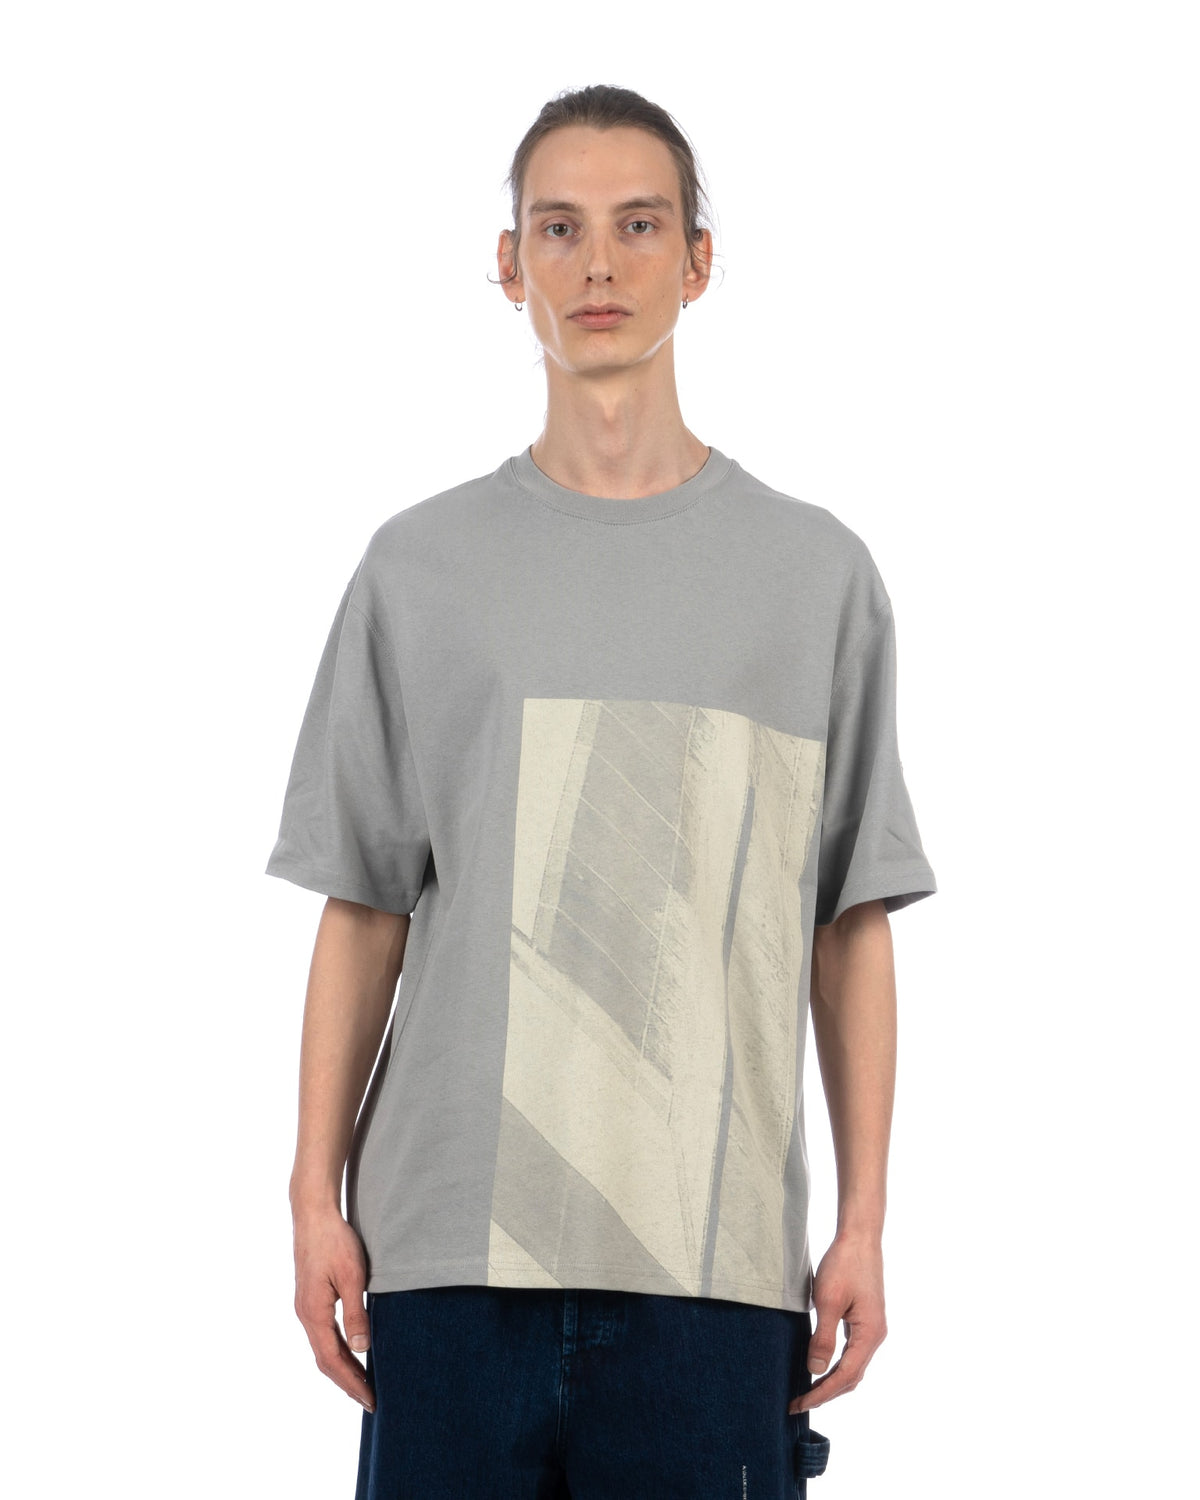 A-COLD-WALL* | Strand T-Shirt Cement - Concrete